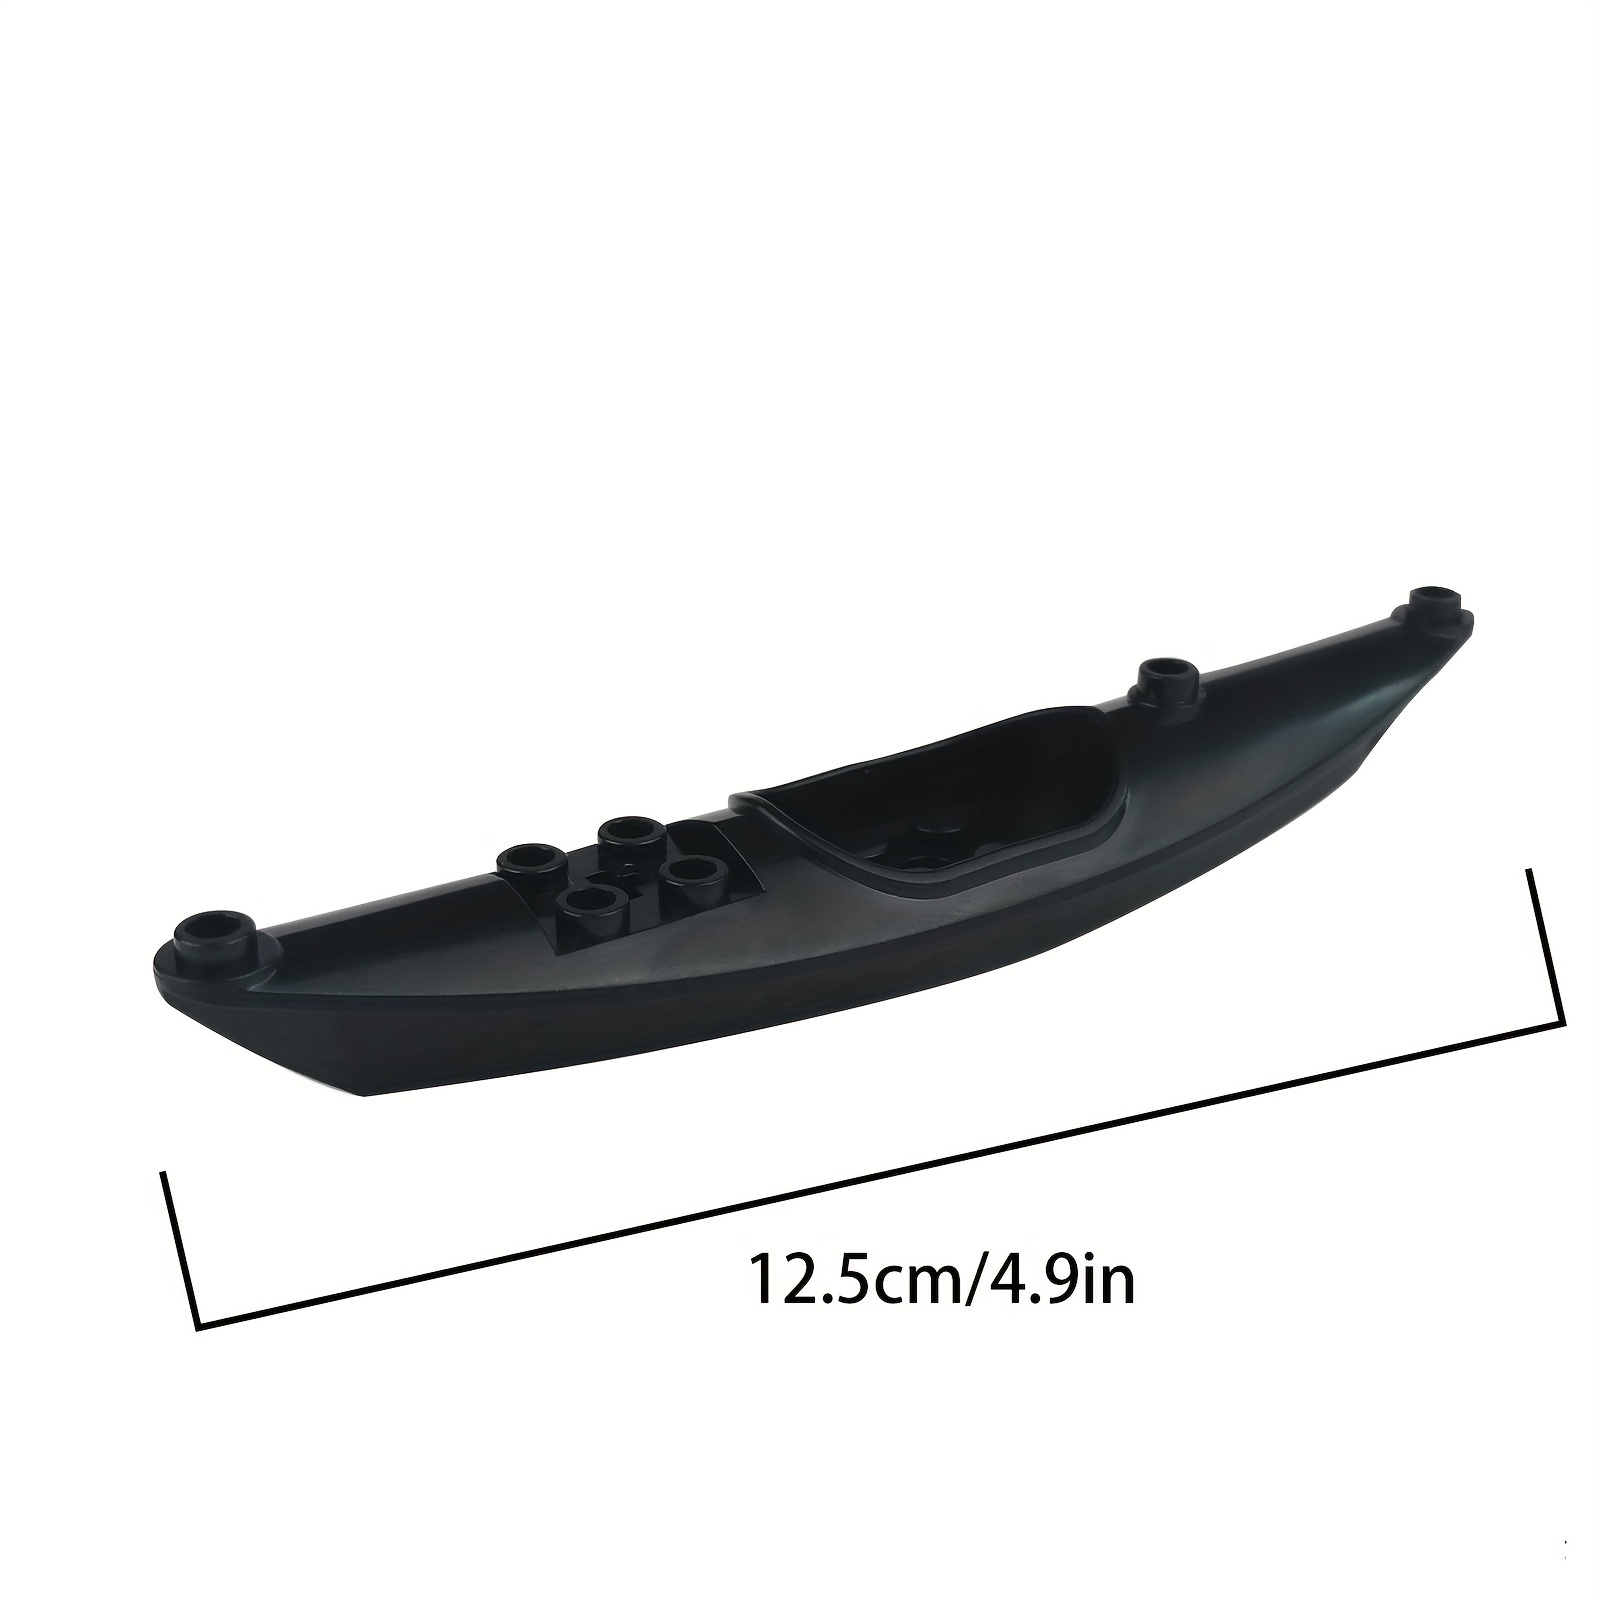 Black Canoe Assembly Building Block Toy, Canoe Accessories Gift